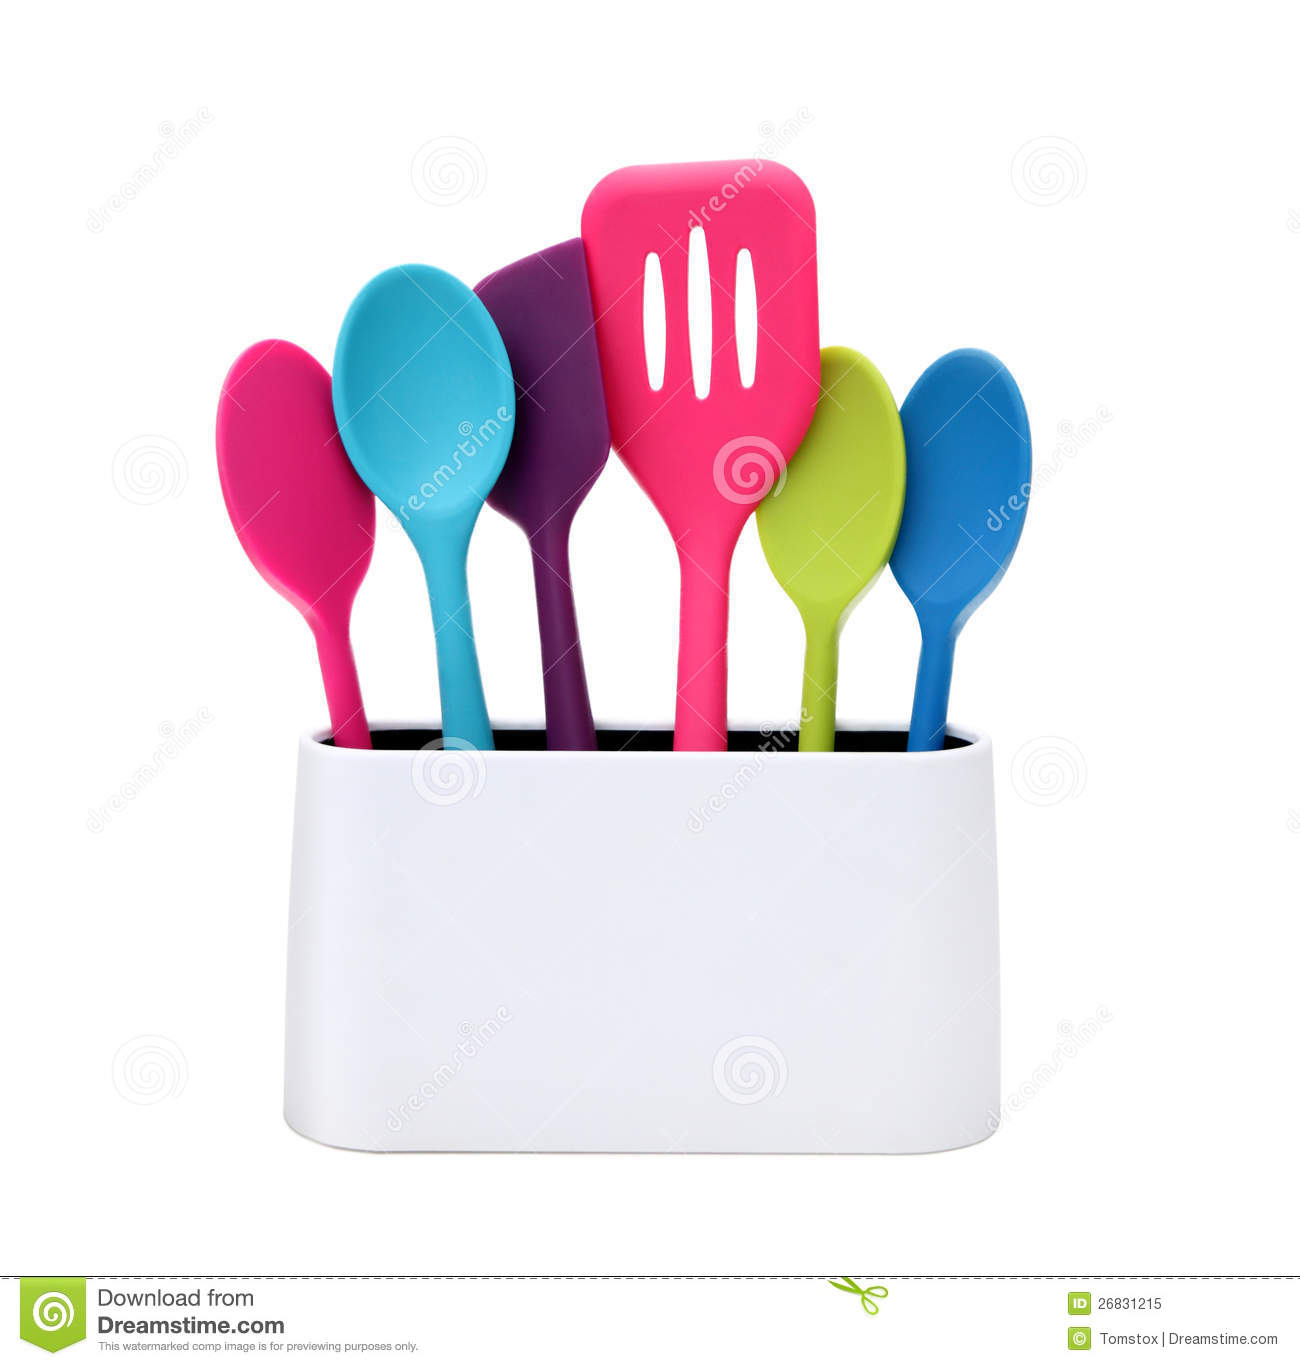 Cooking Utensils Drawing Modern Cooking Colorful Kitchen Utensils